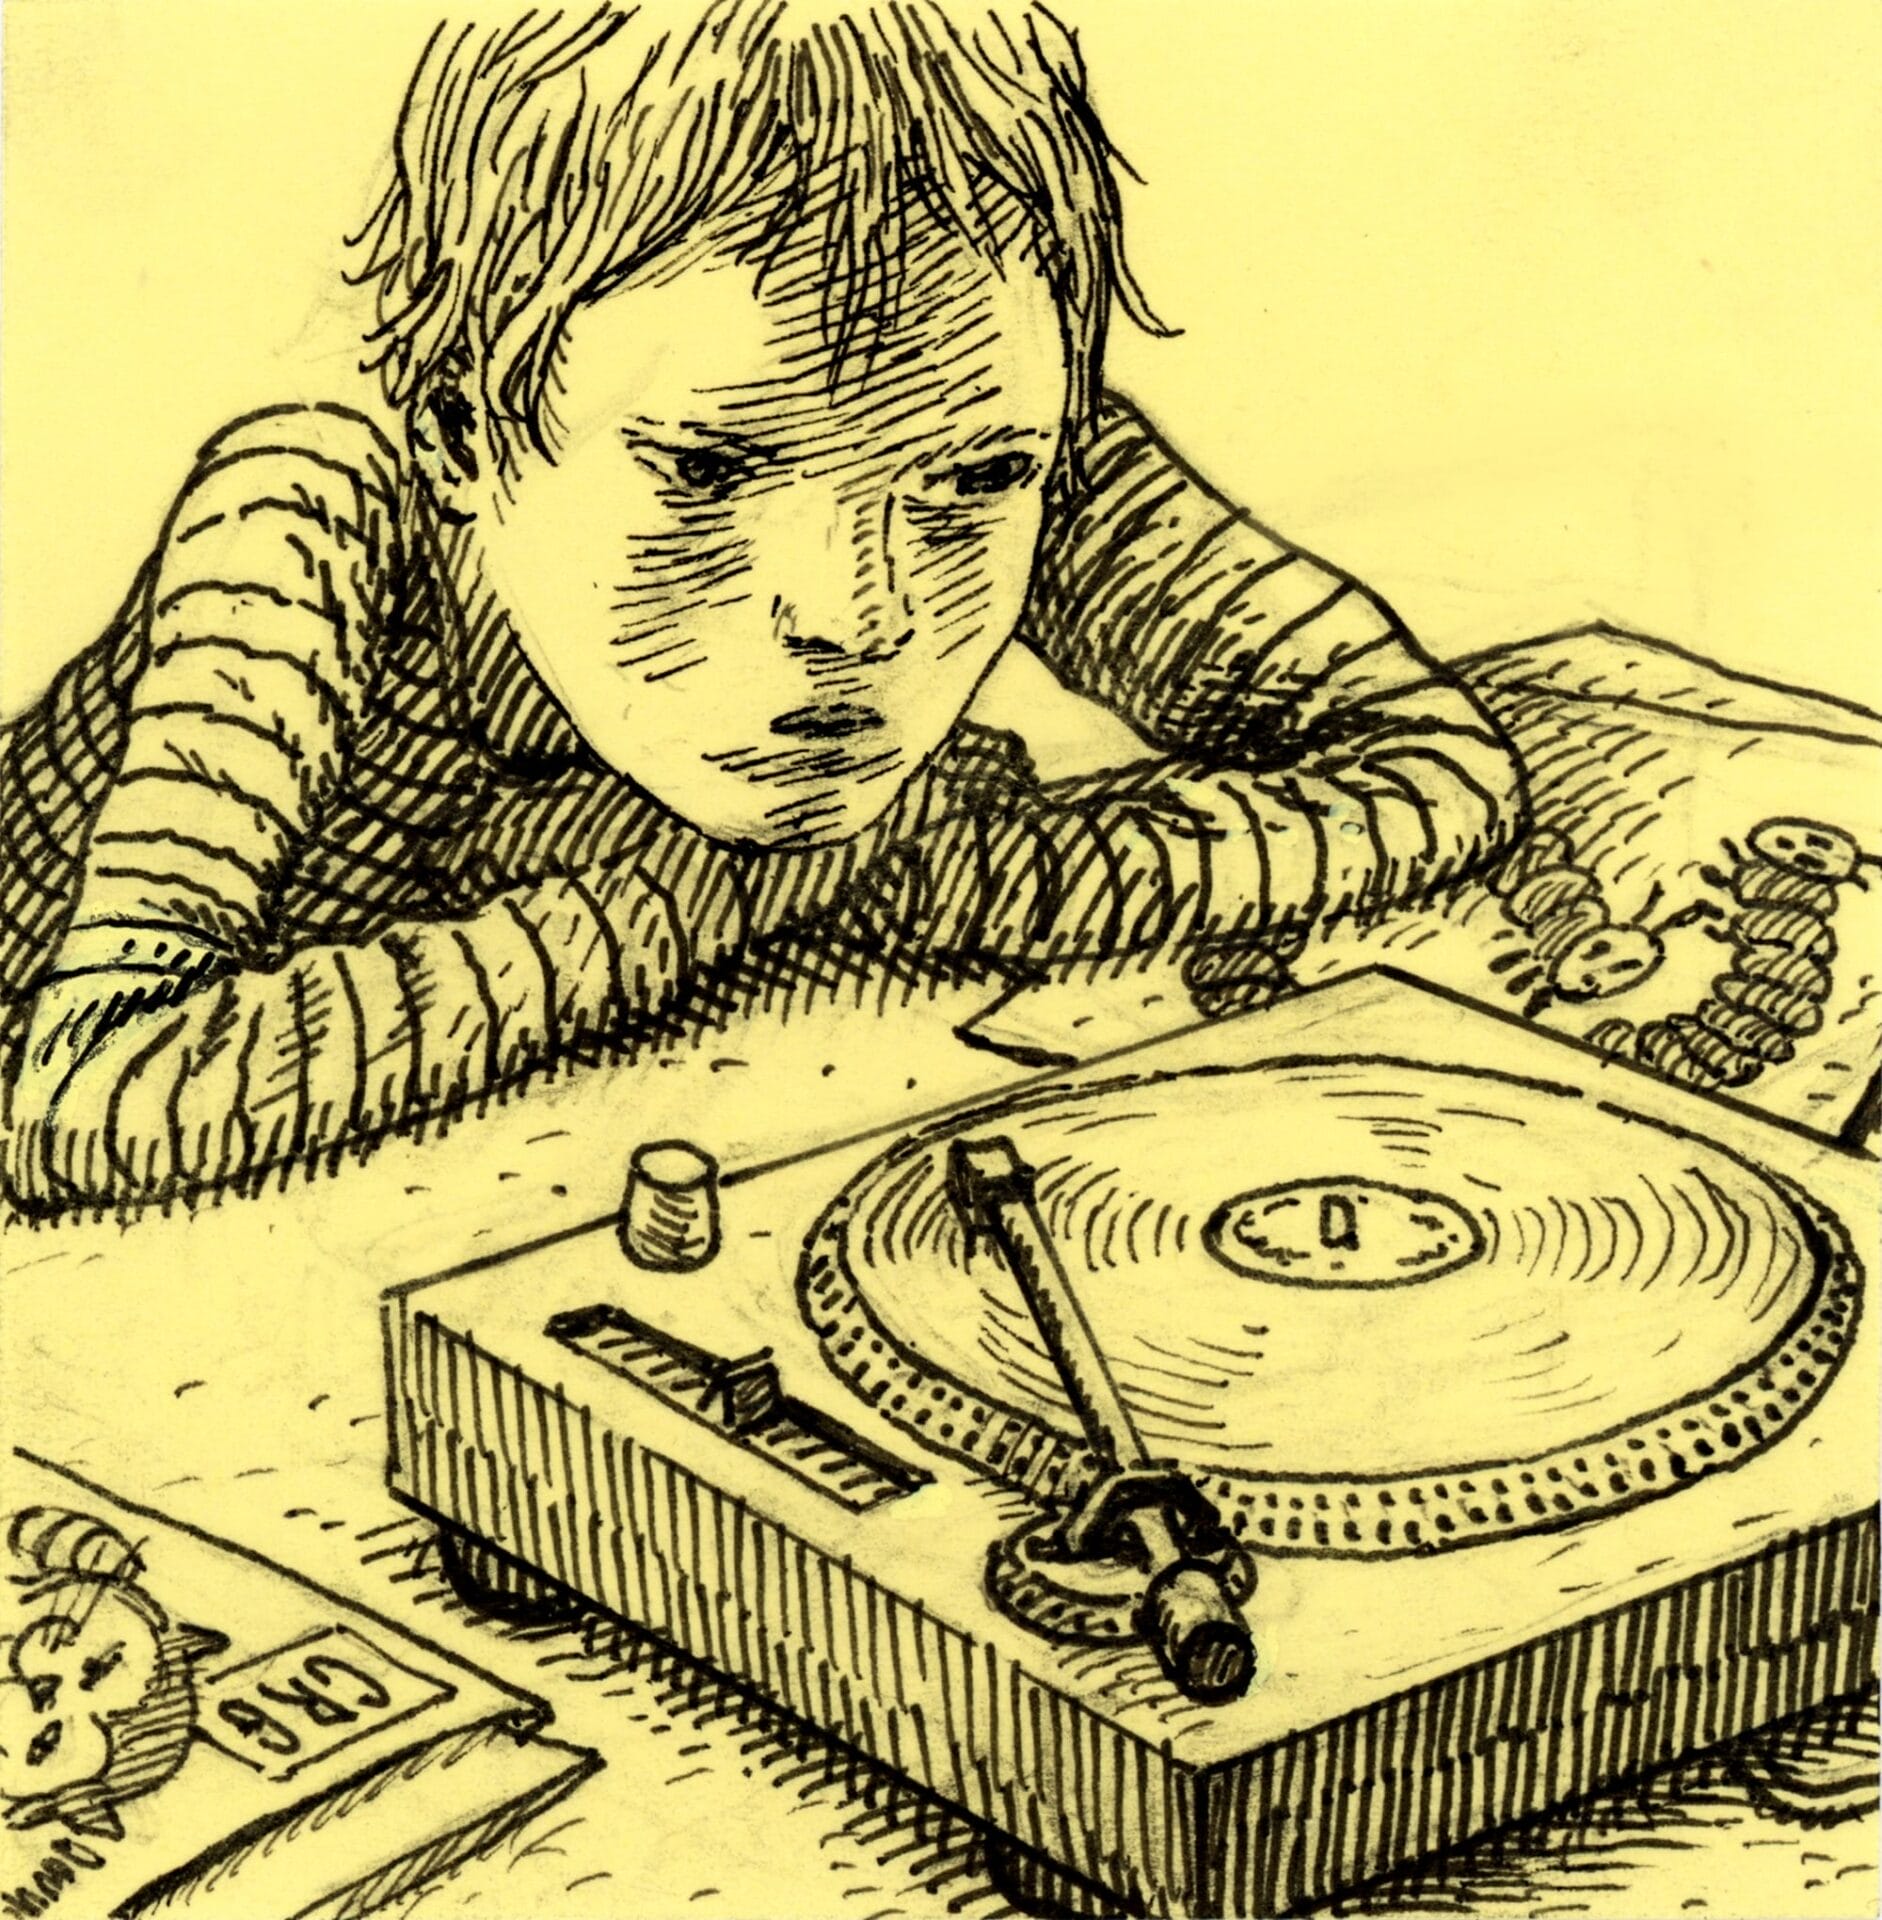 an ink drawing of a child in a striped shirt looking at a record player